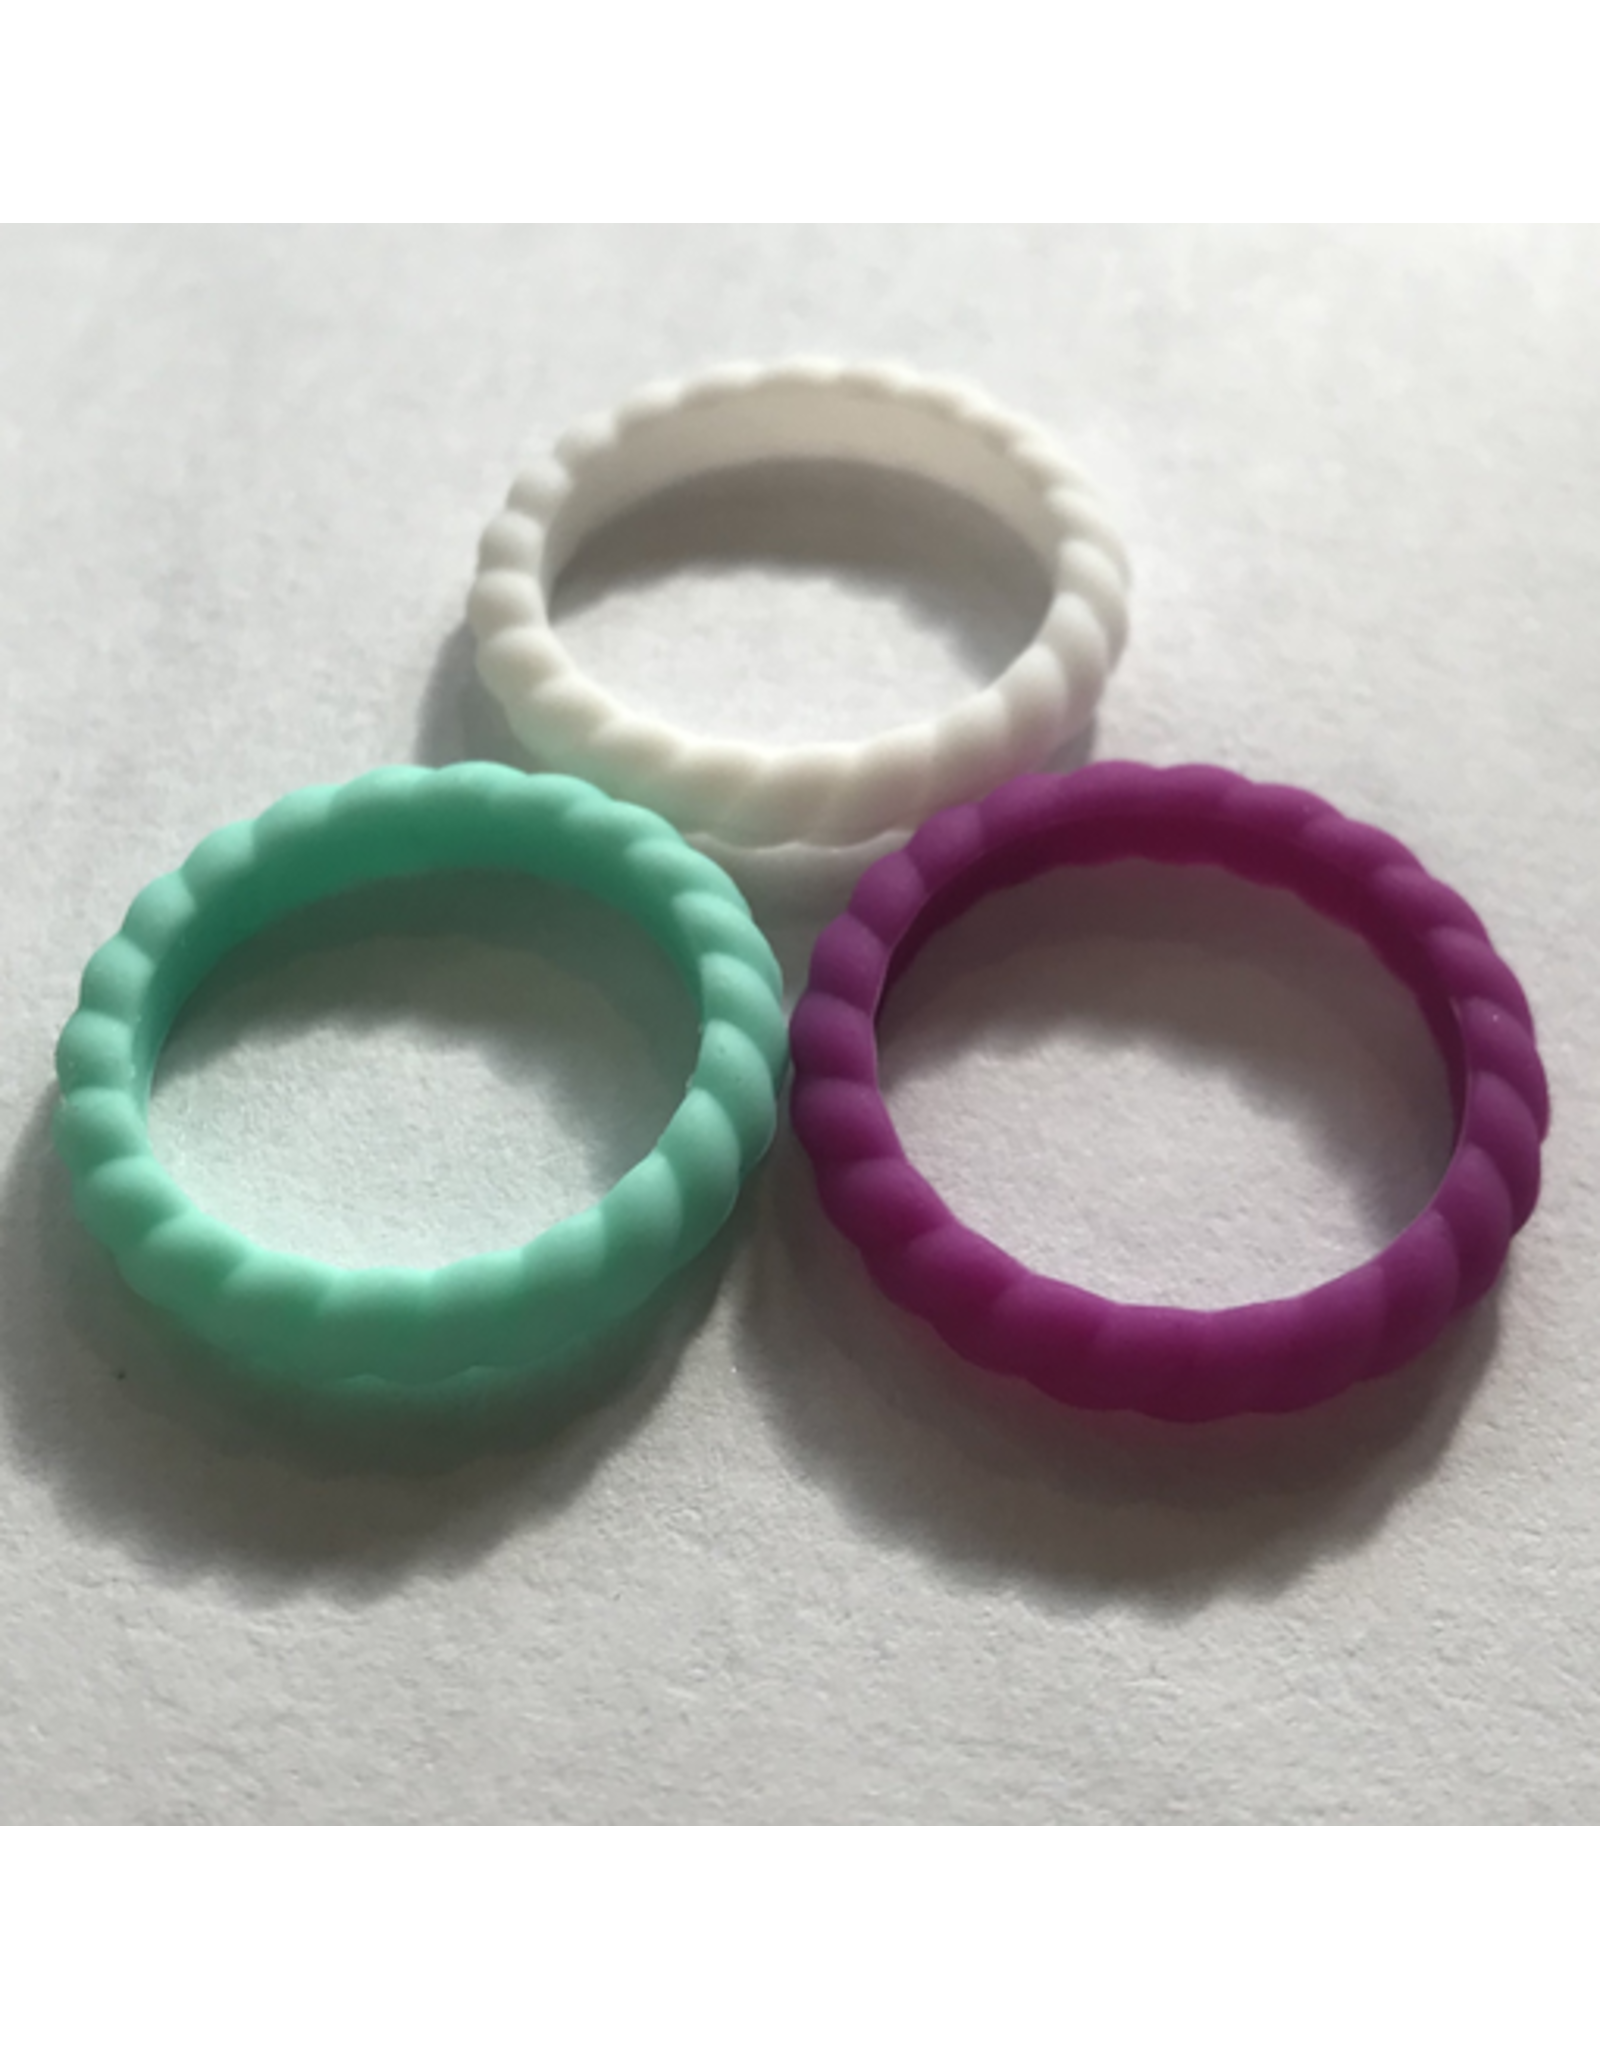 Humannature HUMAN NATURE SILICONE RING 3 PACK